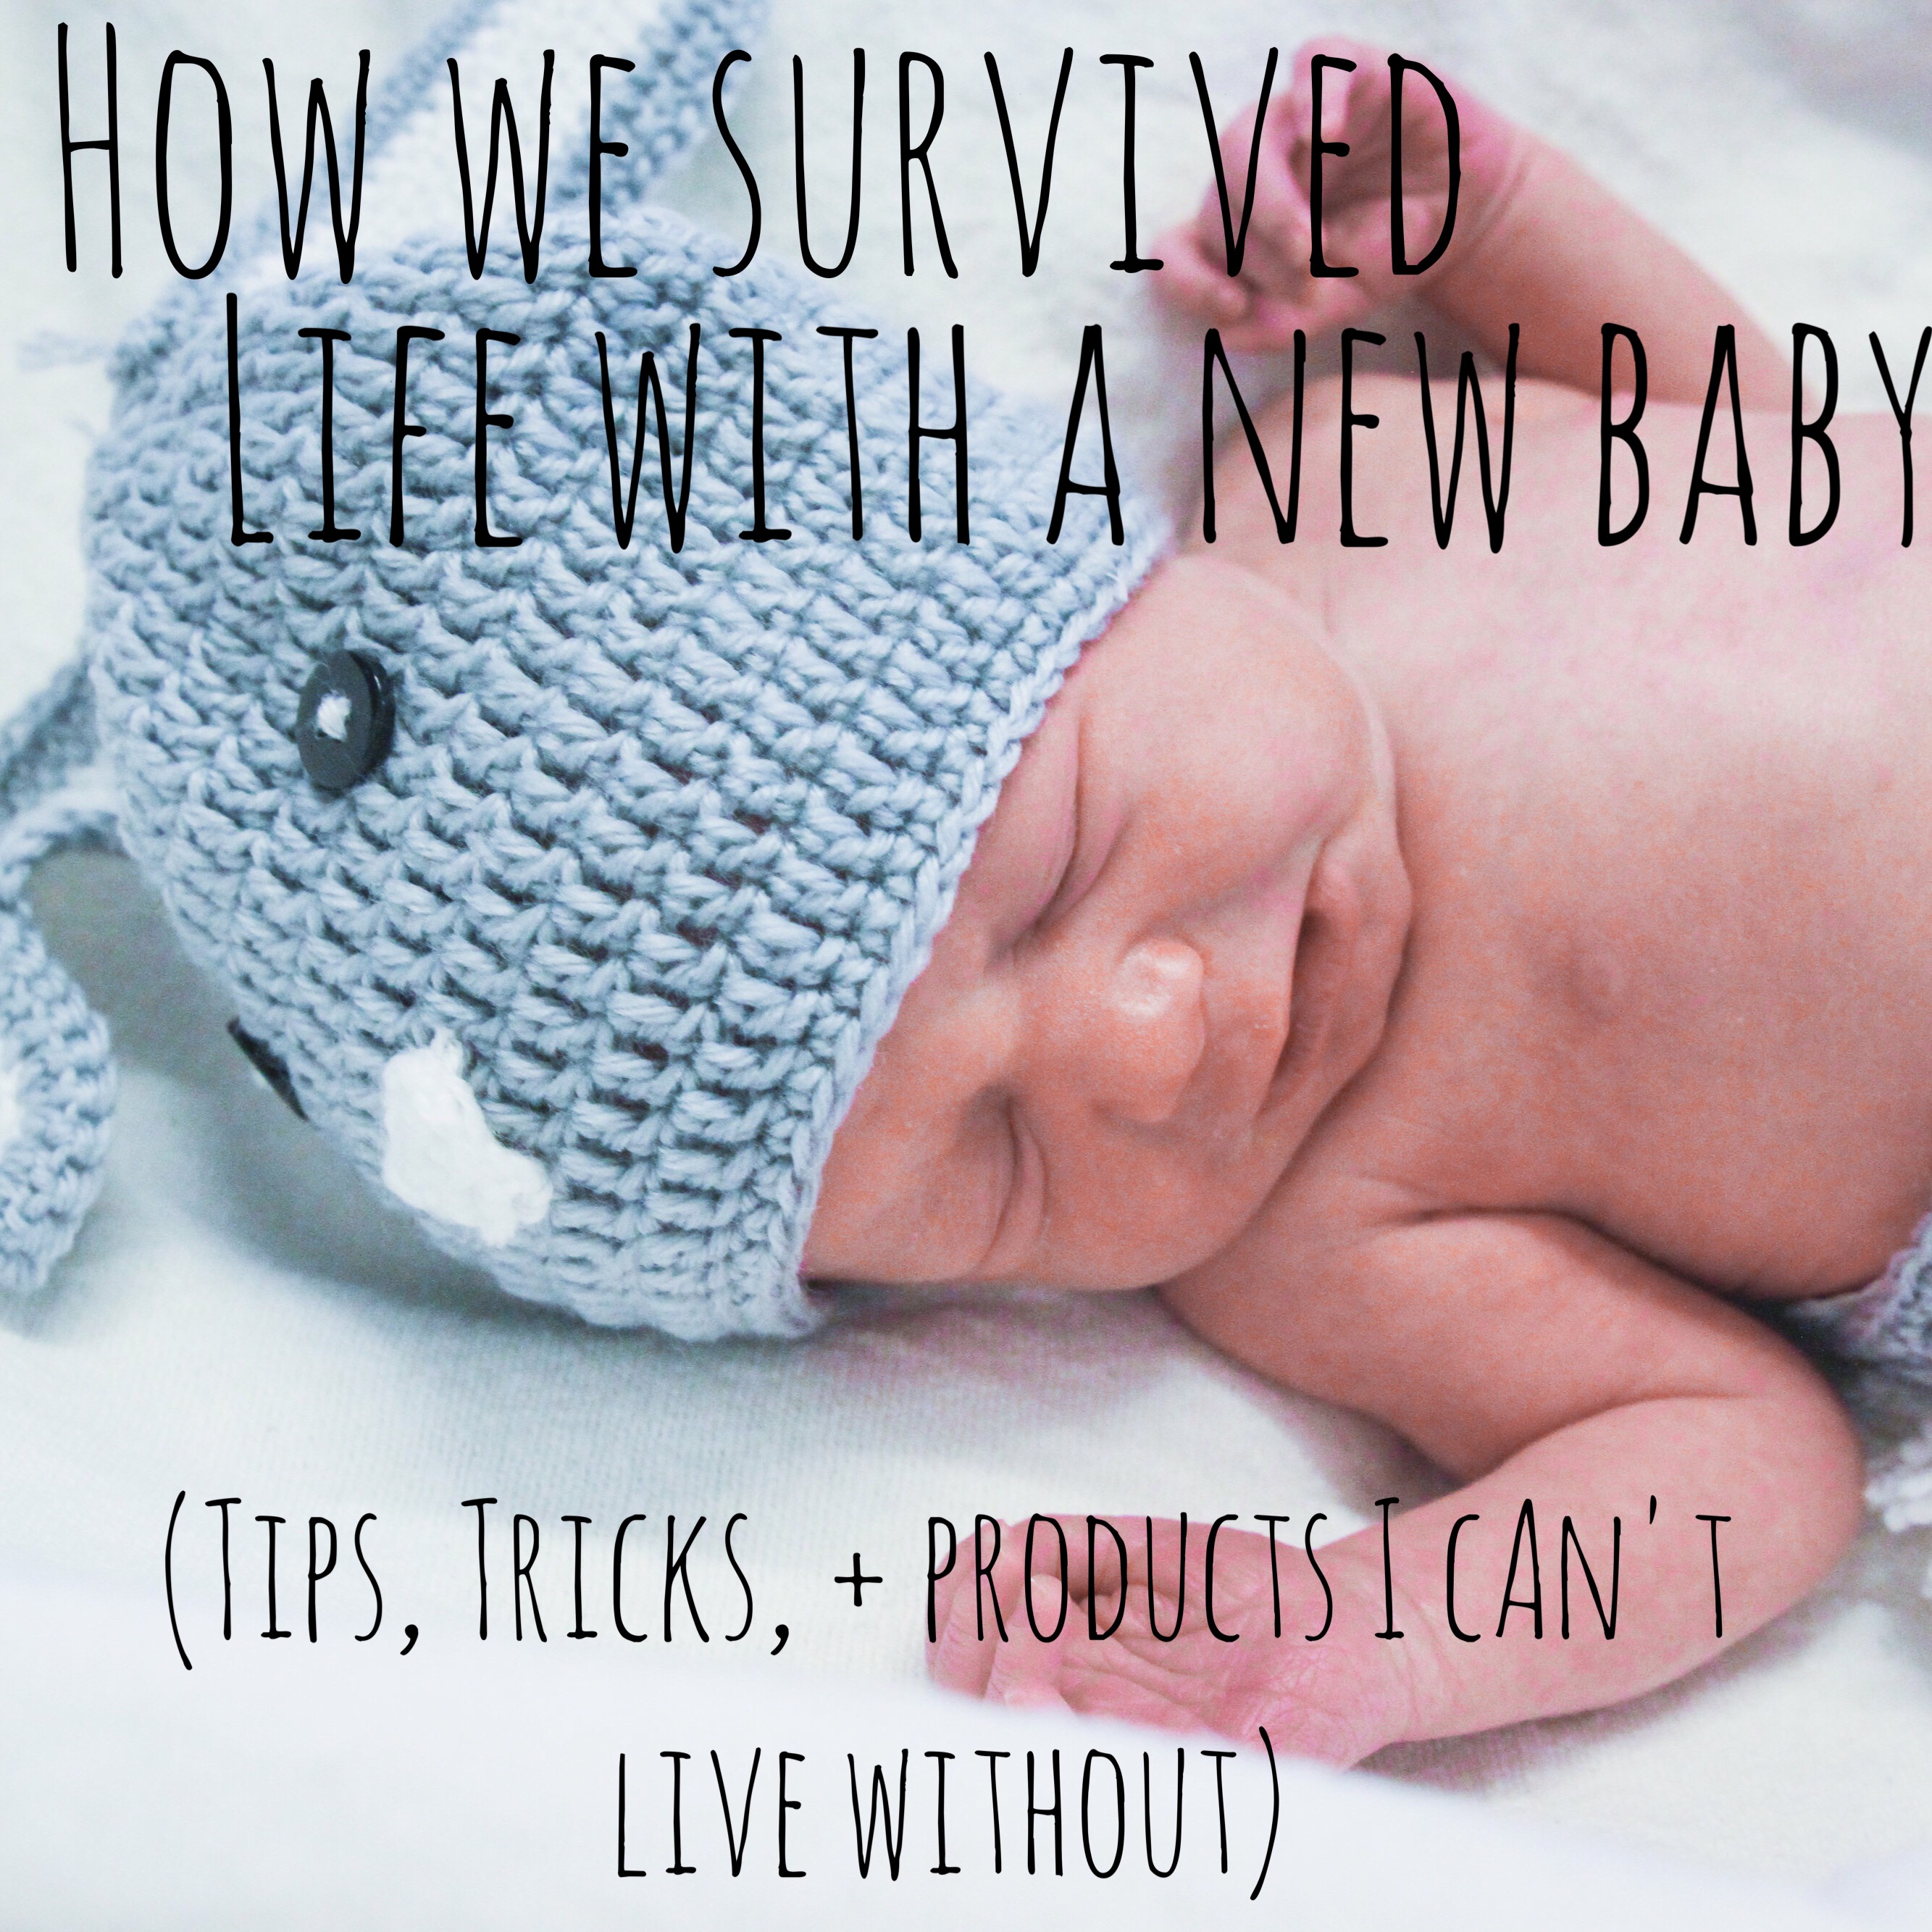 Life With a Newborn by popular Denver mom blogger, All Things Lovely